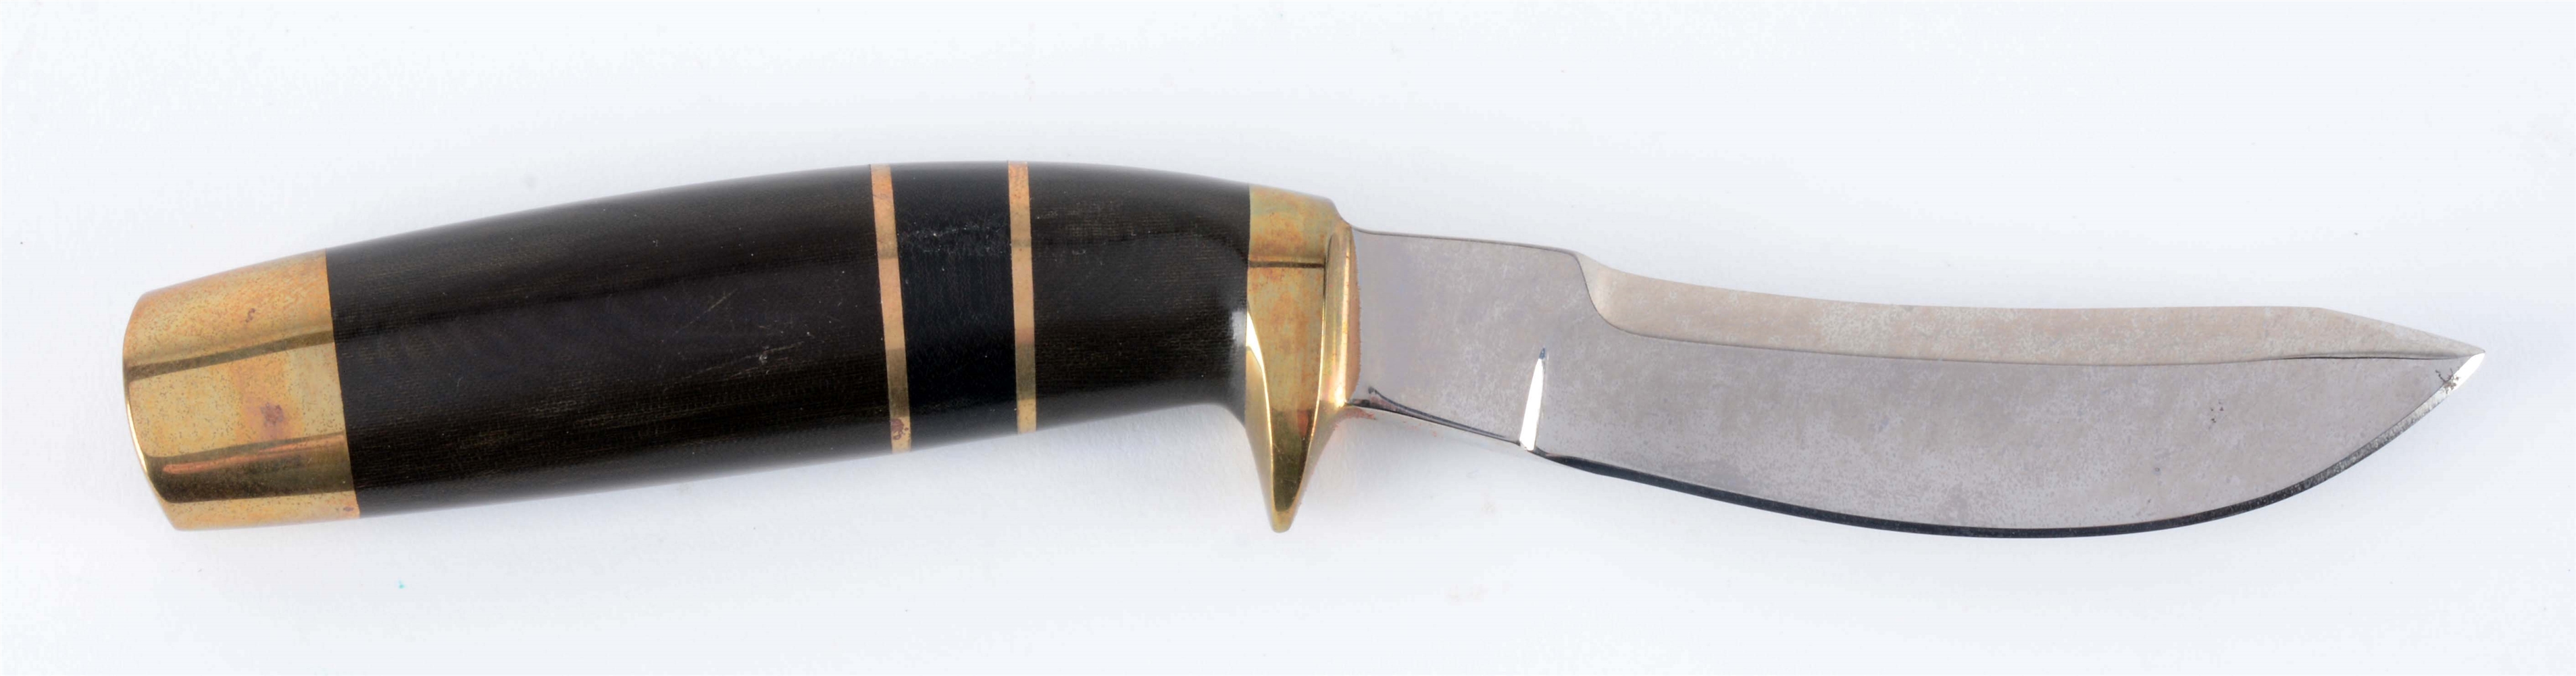 J.N. COOPER UNUSUAL SMALL SKINNER WITH MICARTA AND BRASS HANDLE.